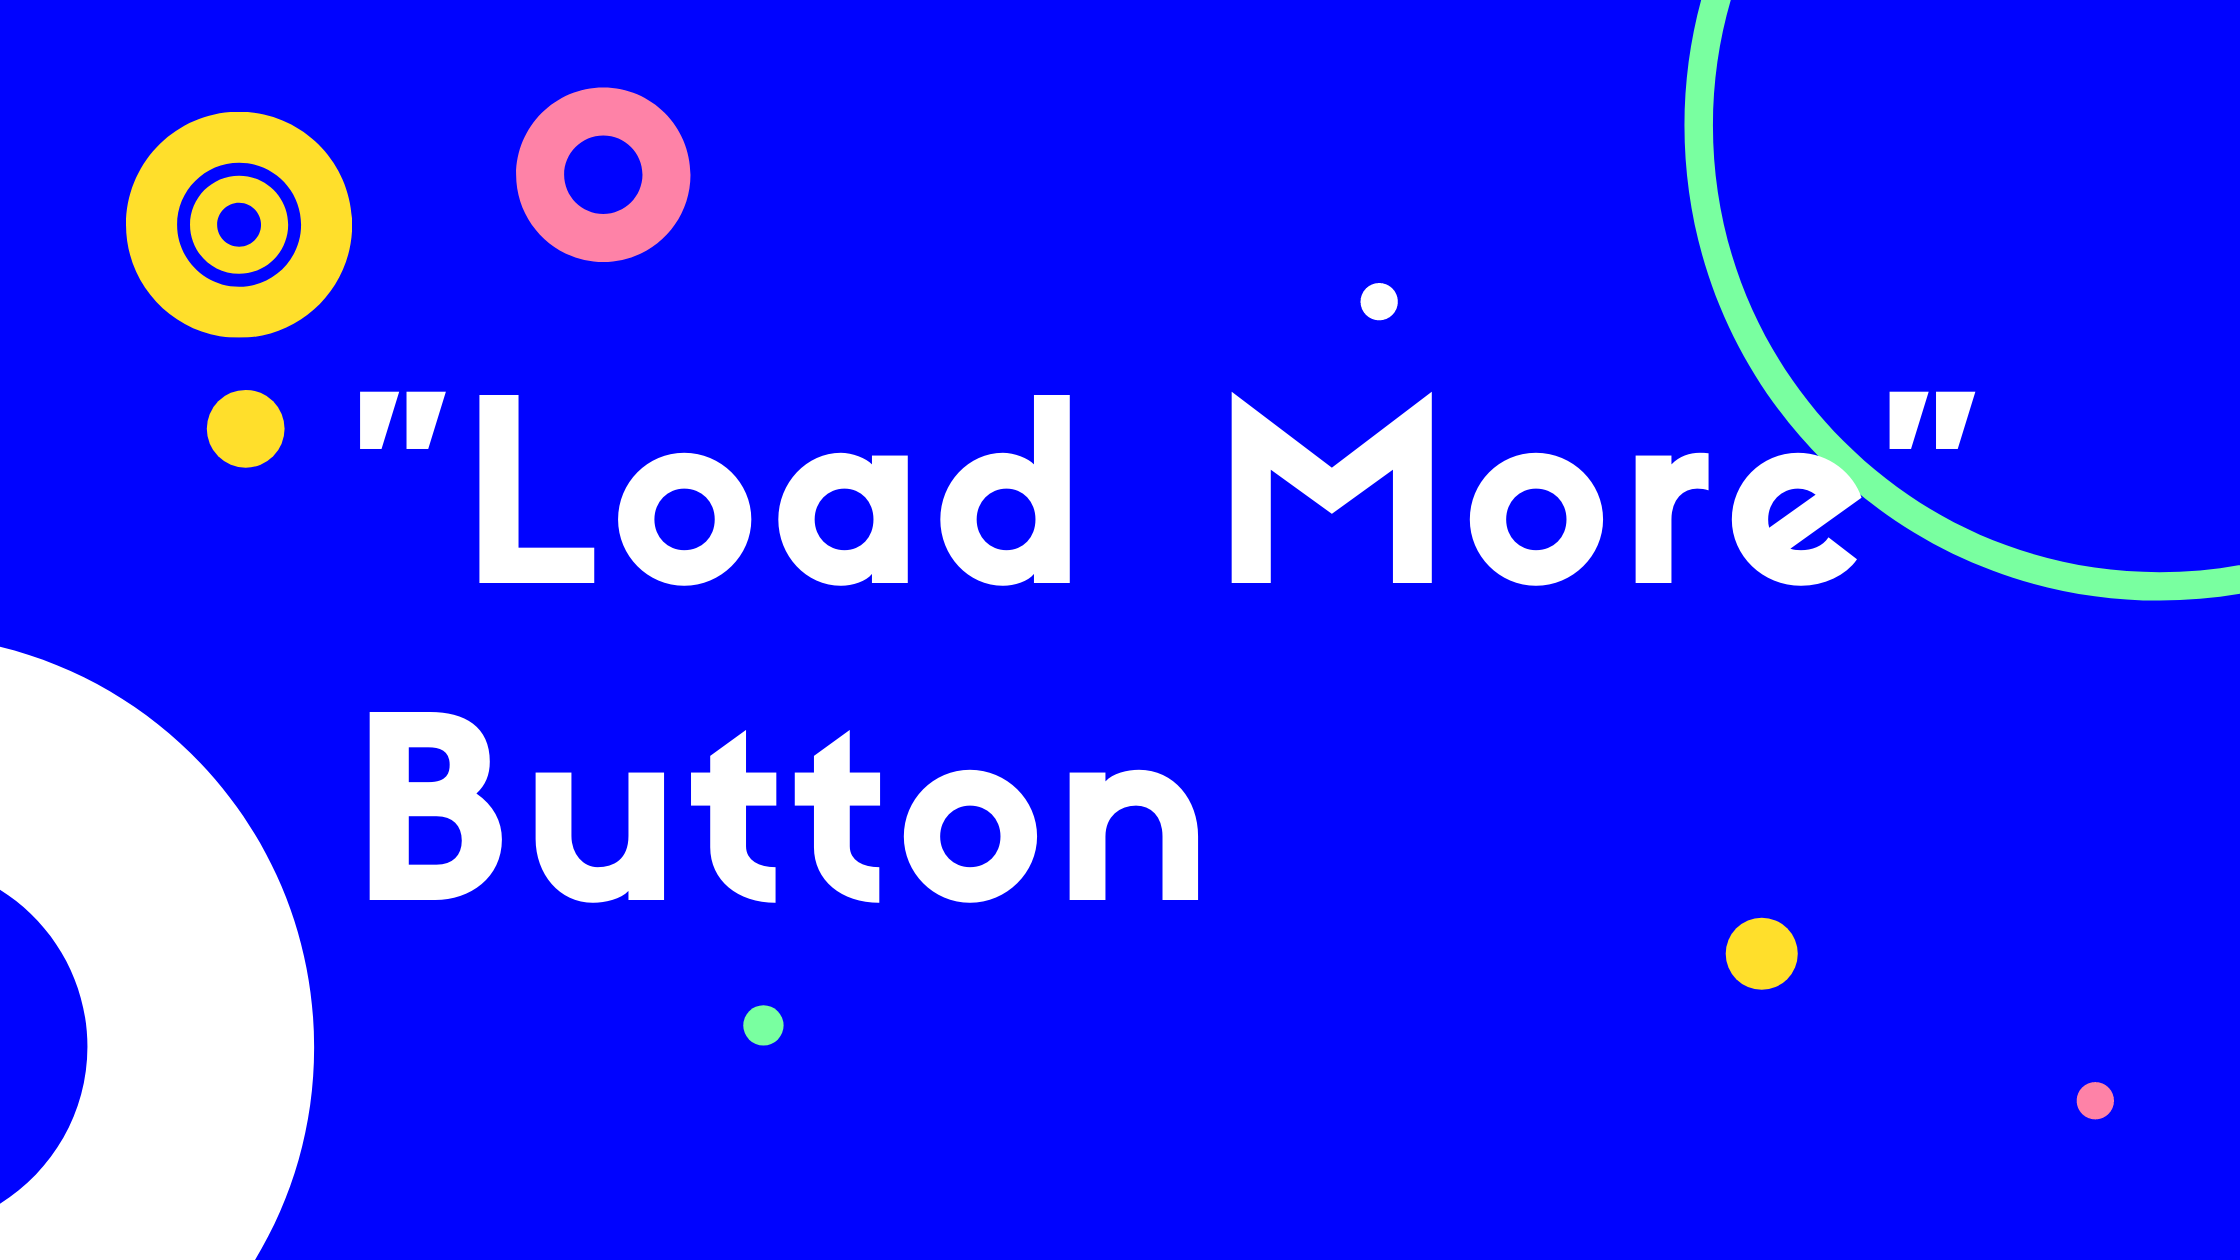 How to implement a "Load More" button in JavaScript